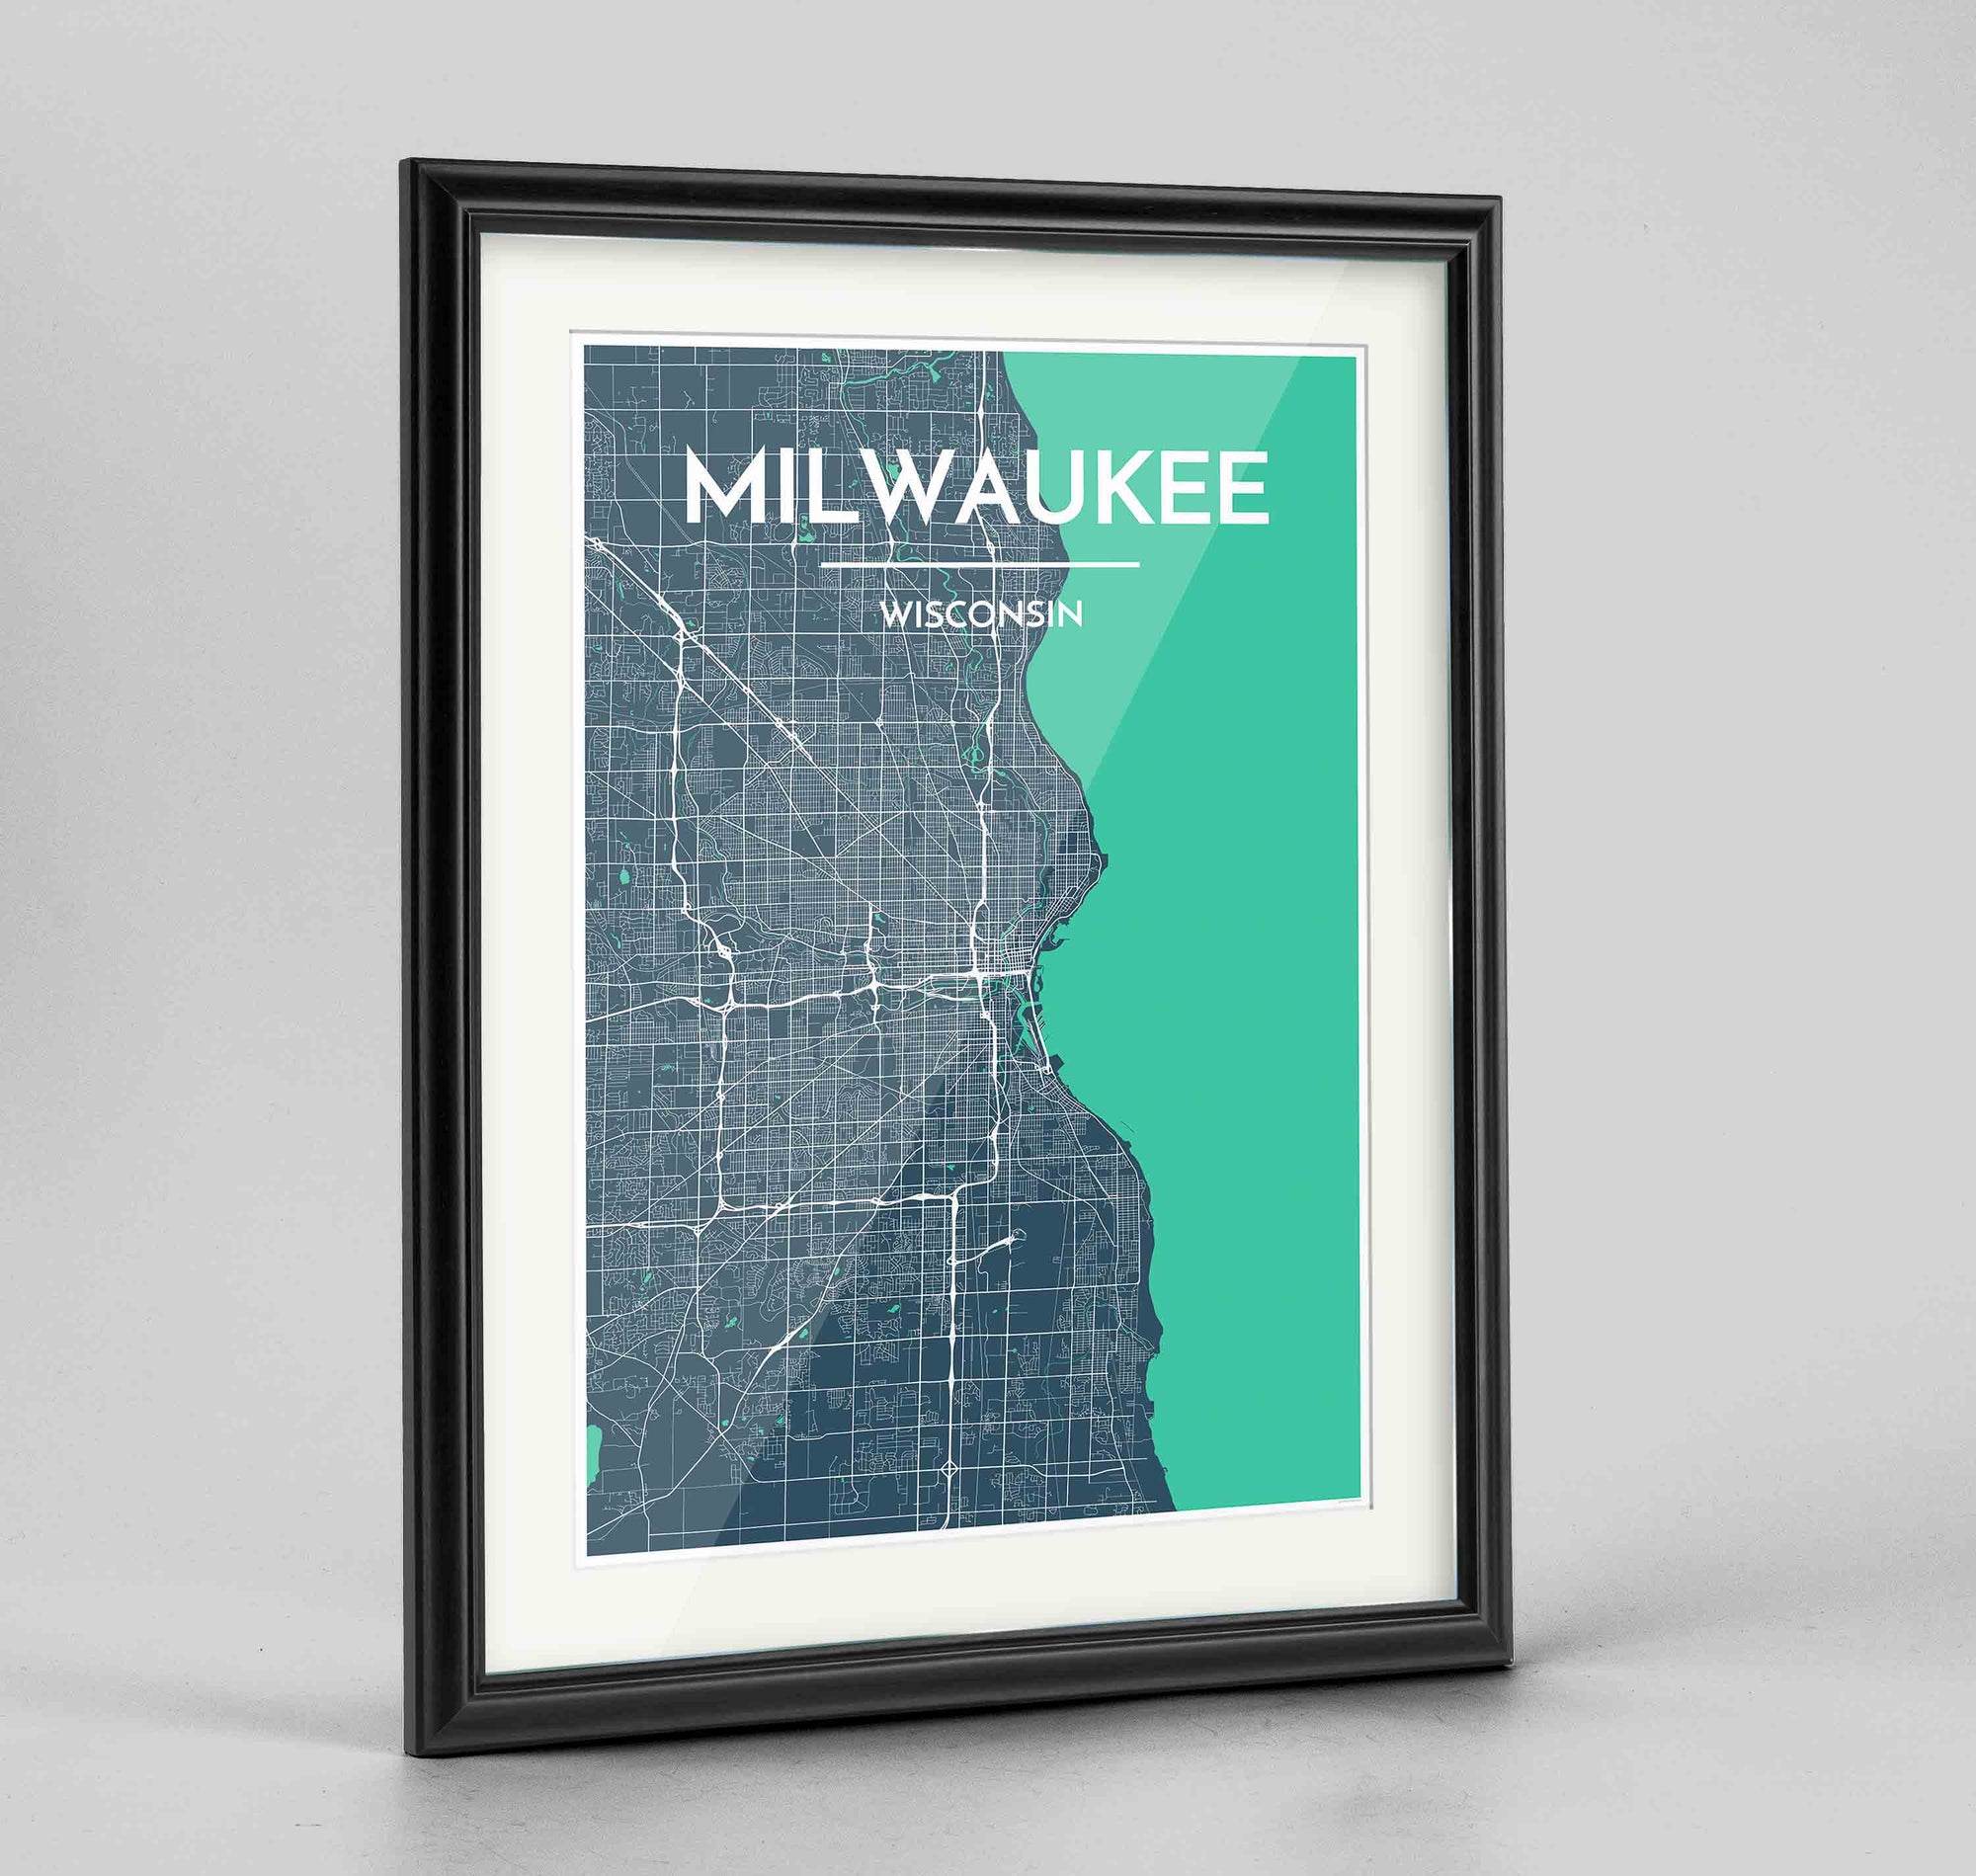 Framed Milwaukee City Map 24x36" Traditional Black frame Point Two Design Group